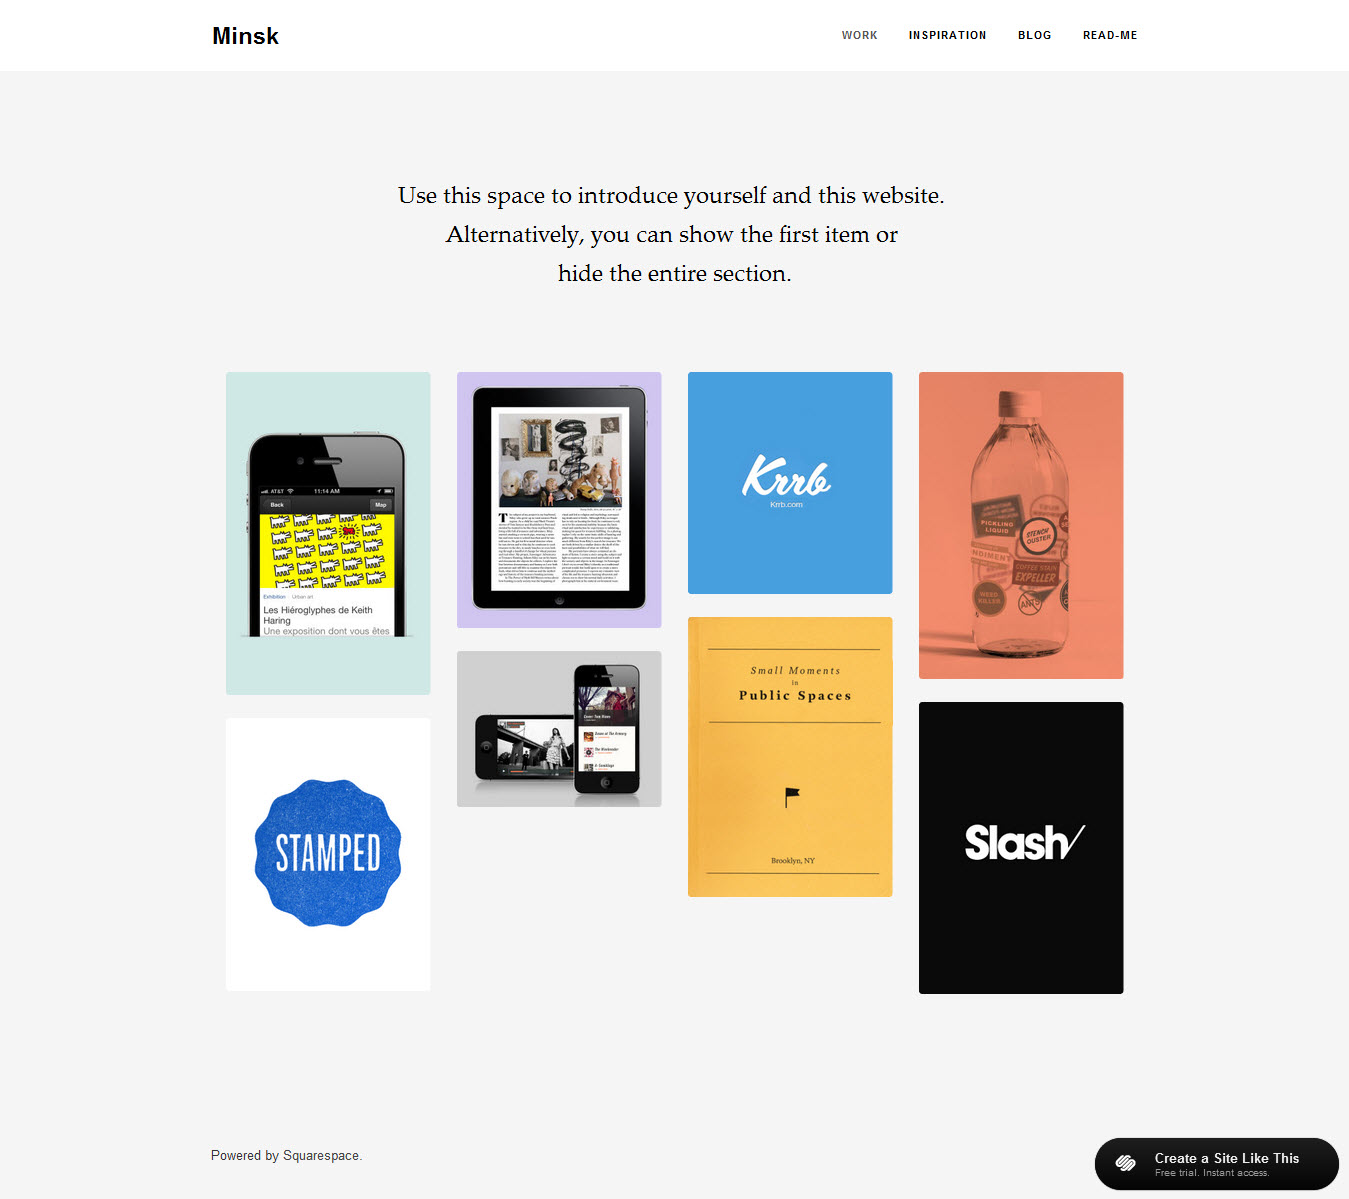 Squarespace Templates: Your Guide to Planning Squarespace Design - Big ...